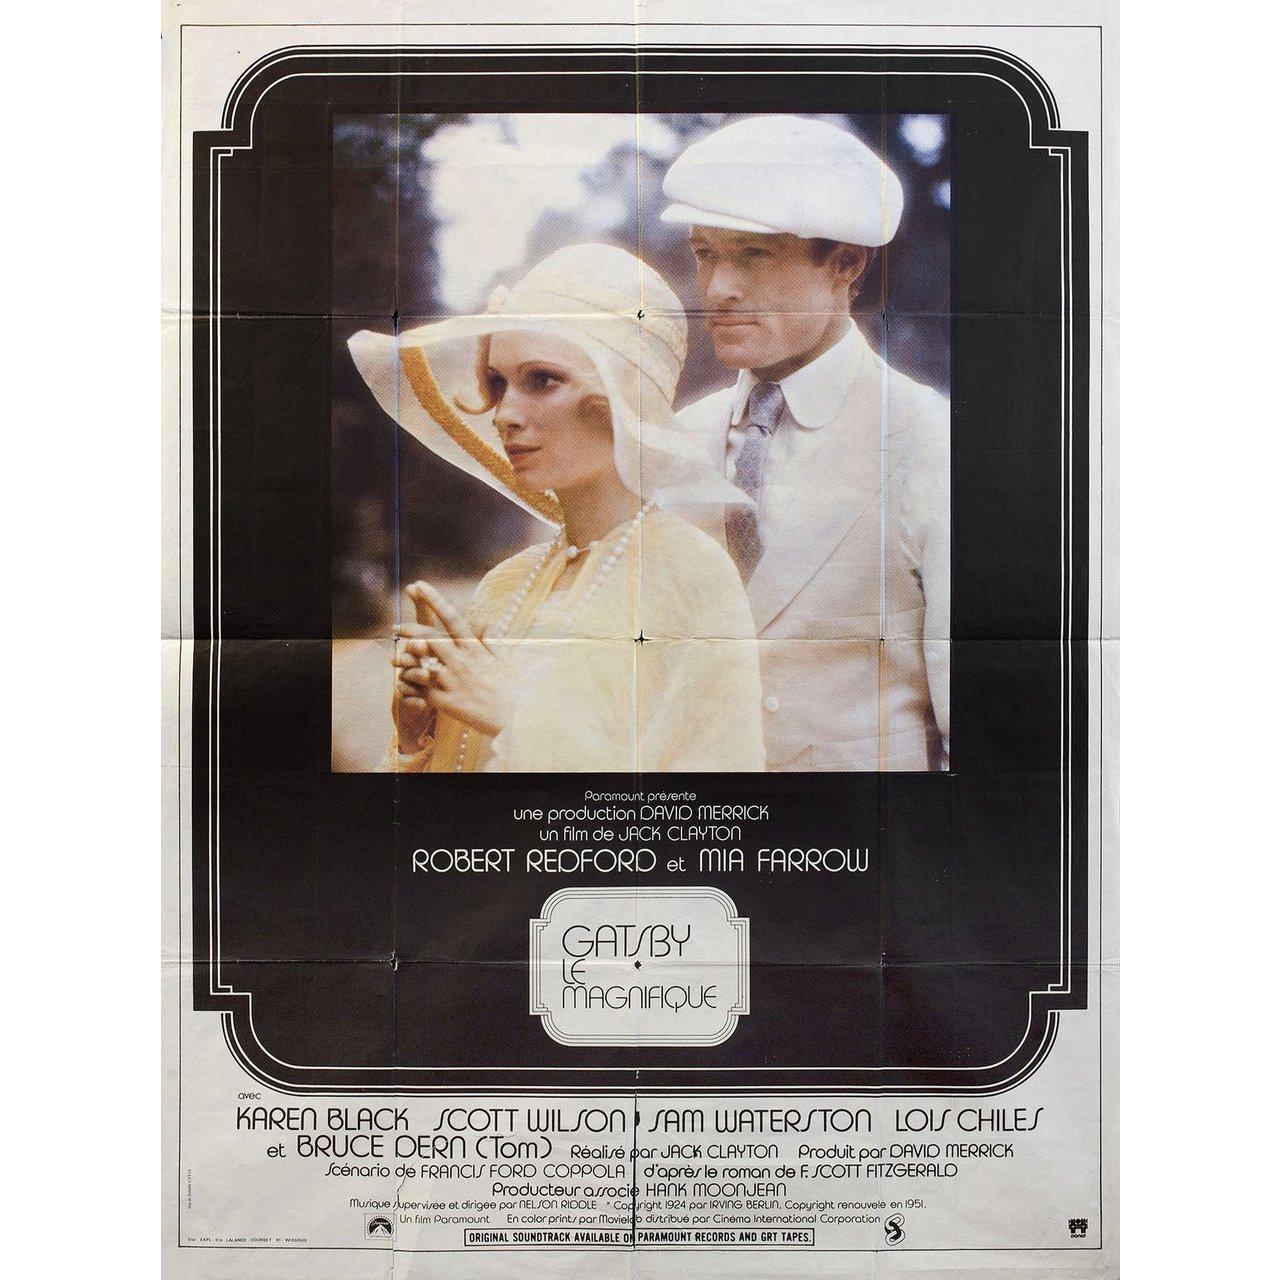 Original 1974 French grande poster for the film “The Great Gatsby” directed by Jack Clayton with Robert Redford / Mia Farrow / Bruce Dern / Karen Black. Good-very good condition, folded. Many original posters were issued folded or were subsequently